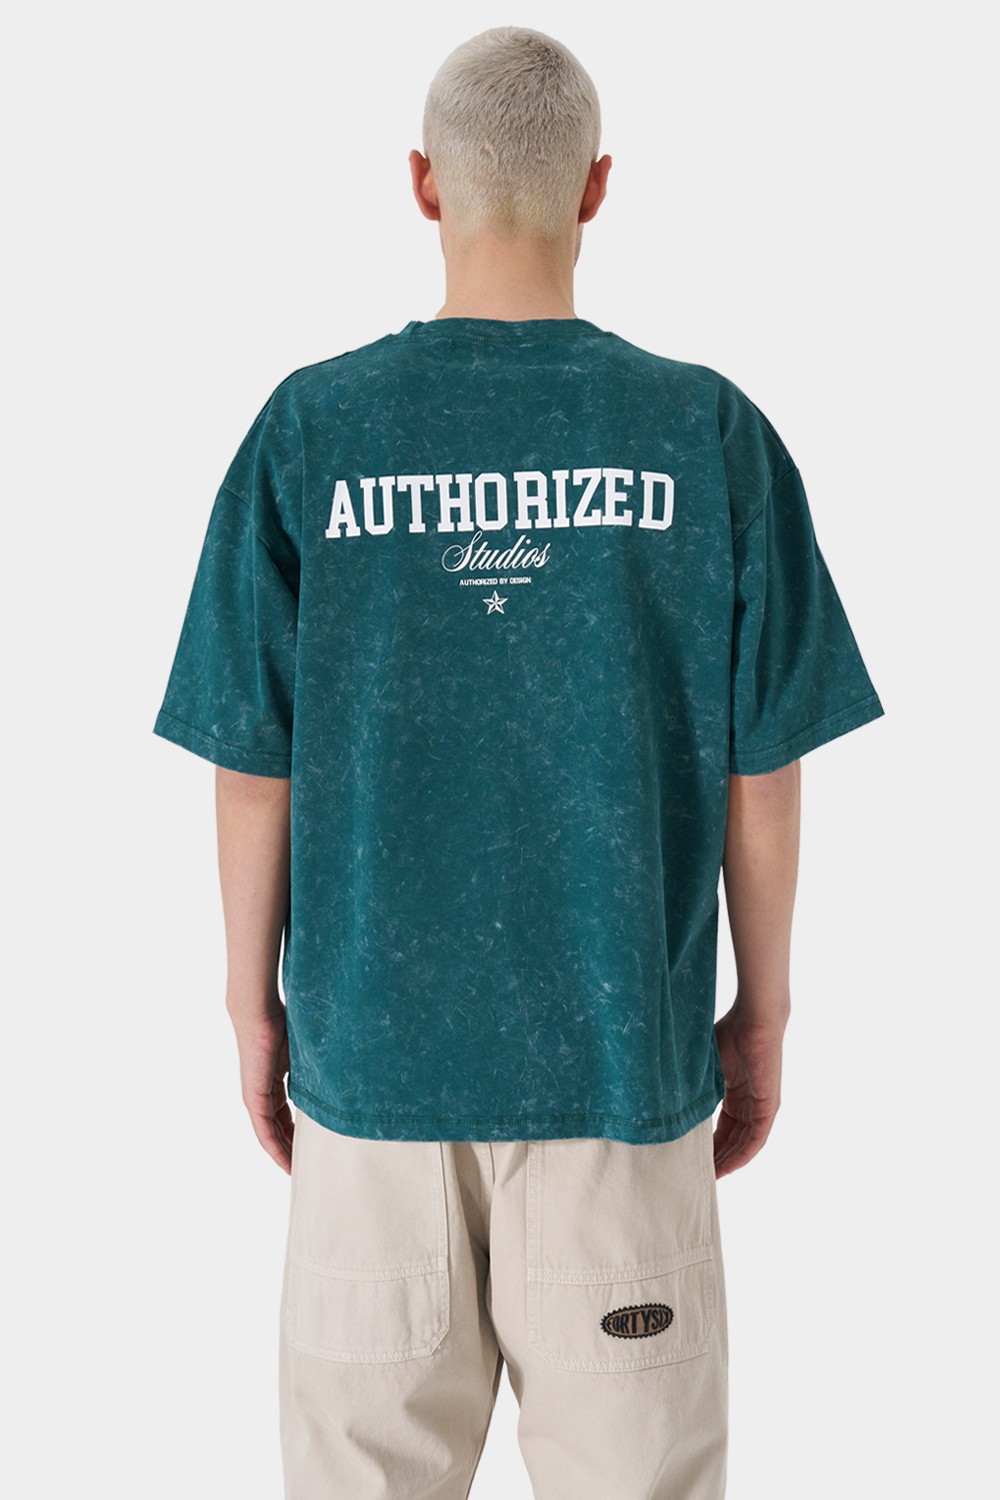 Authorized Studio Graphic Washed T-Shirt (ATH-7)